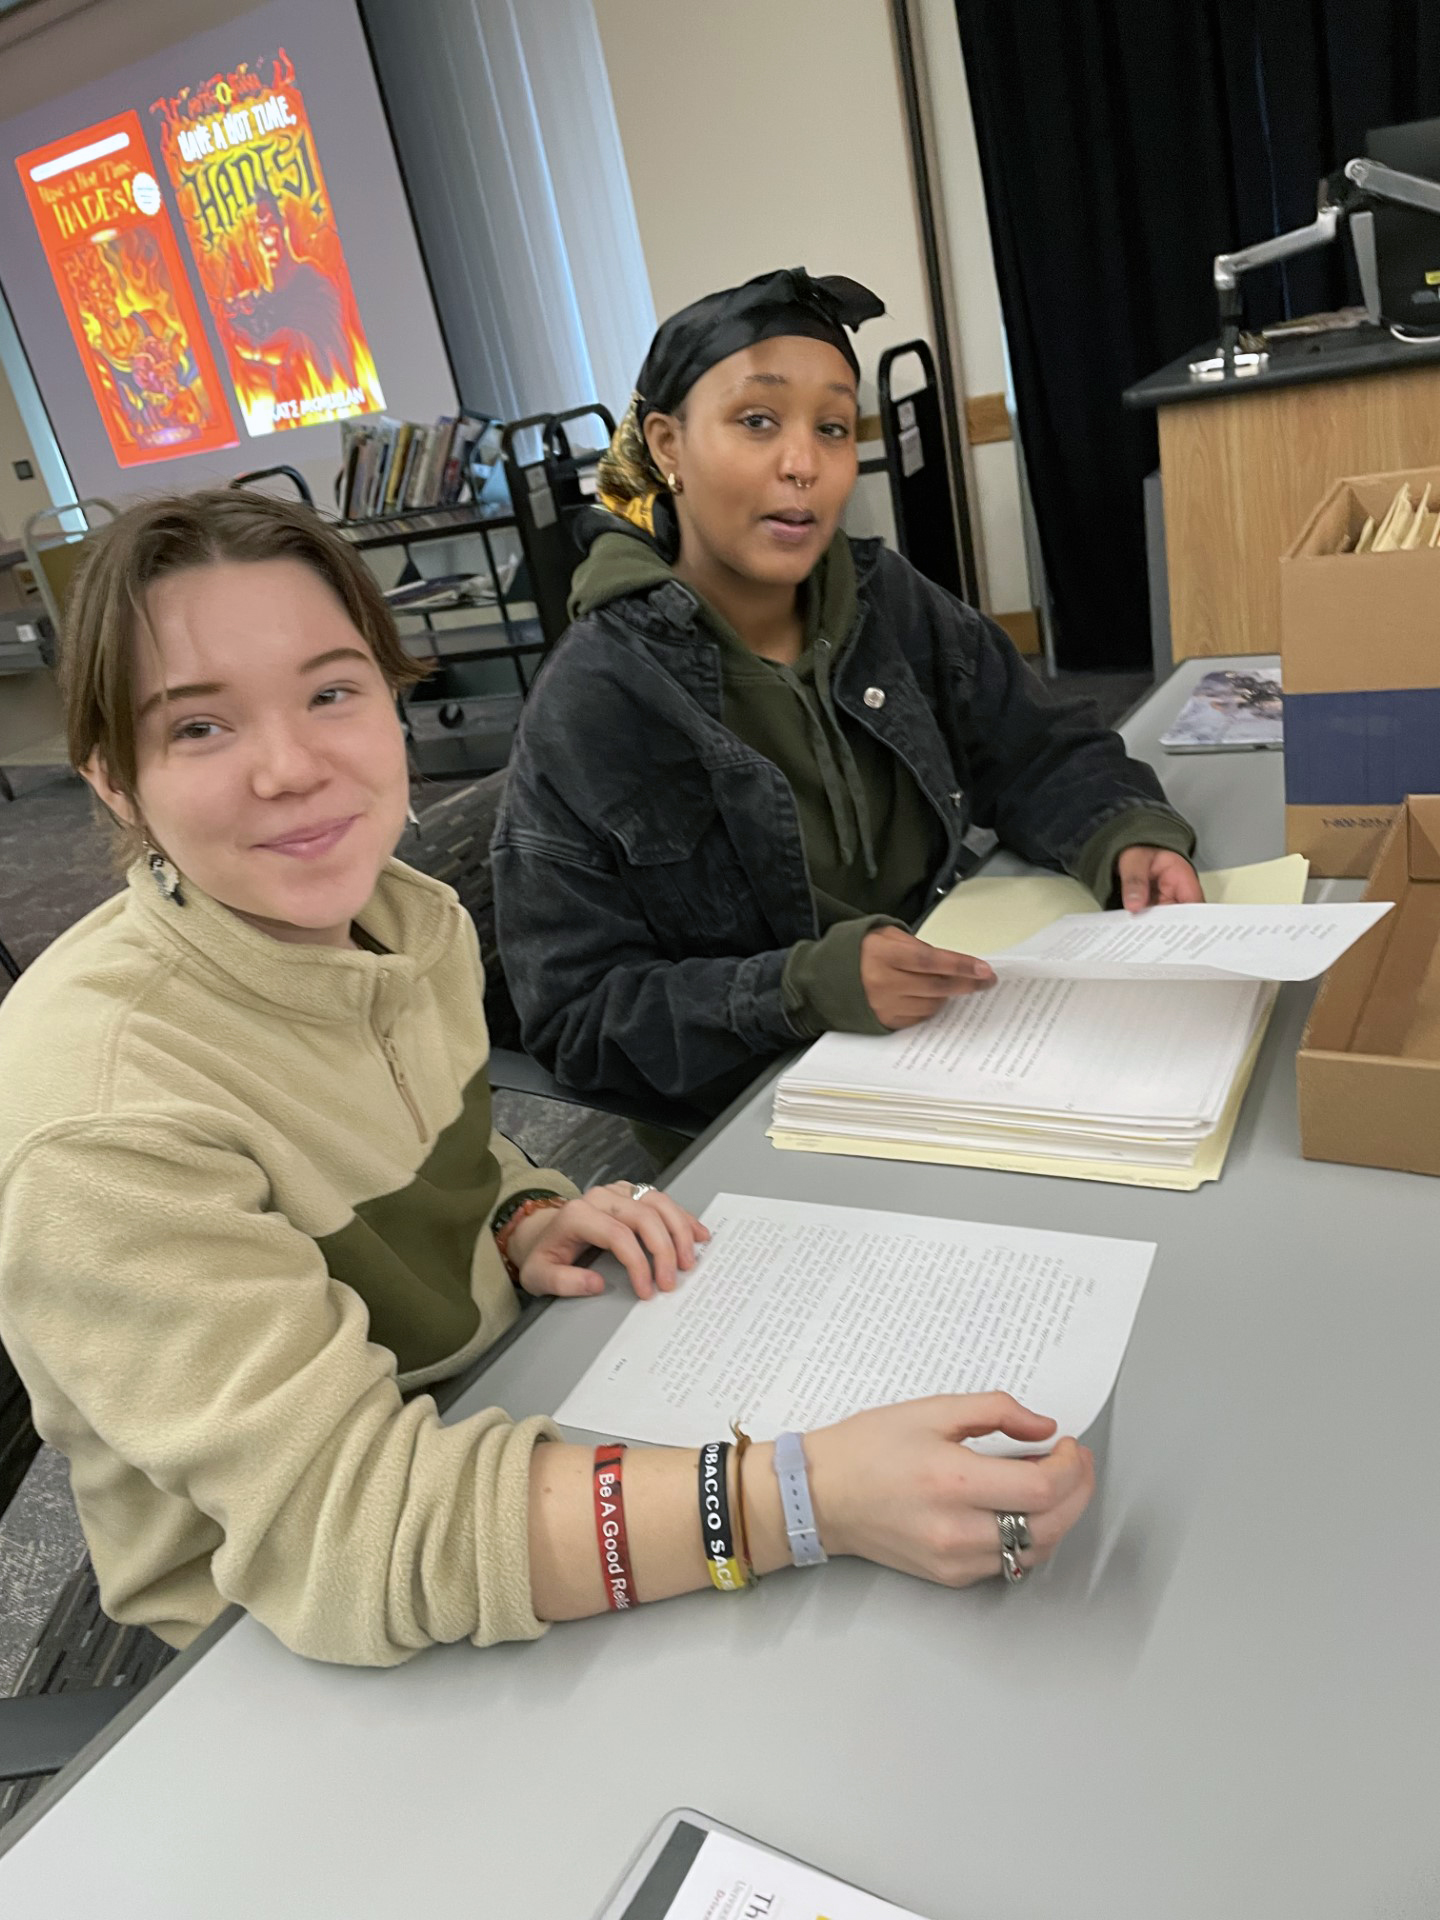 Two students sit at a table viewing typed manuscript materials